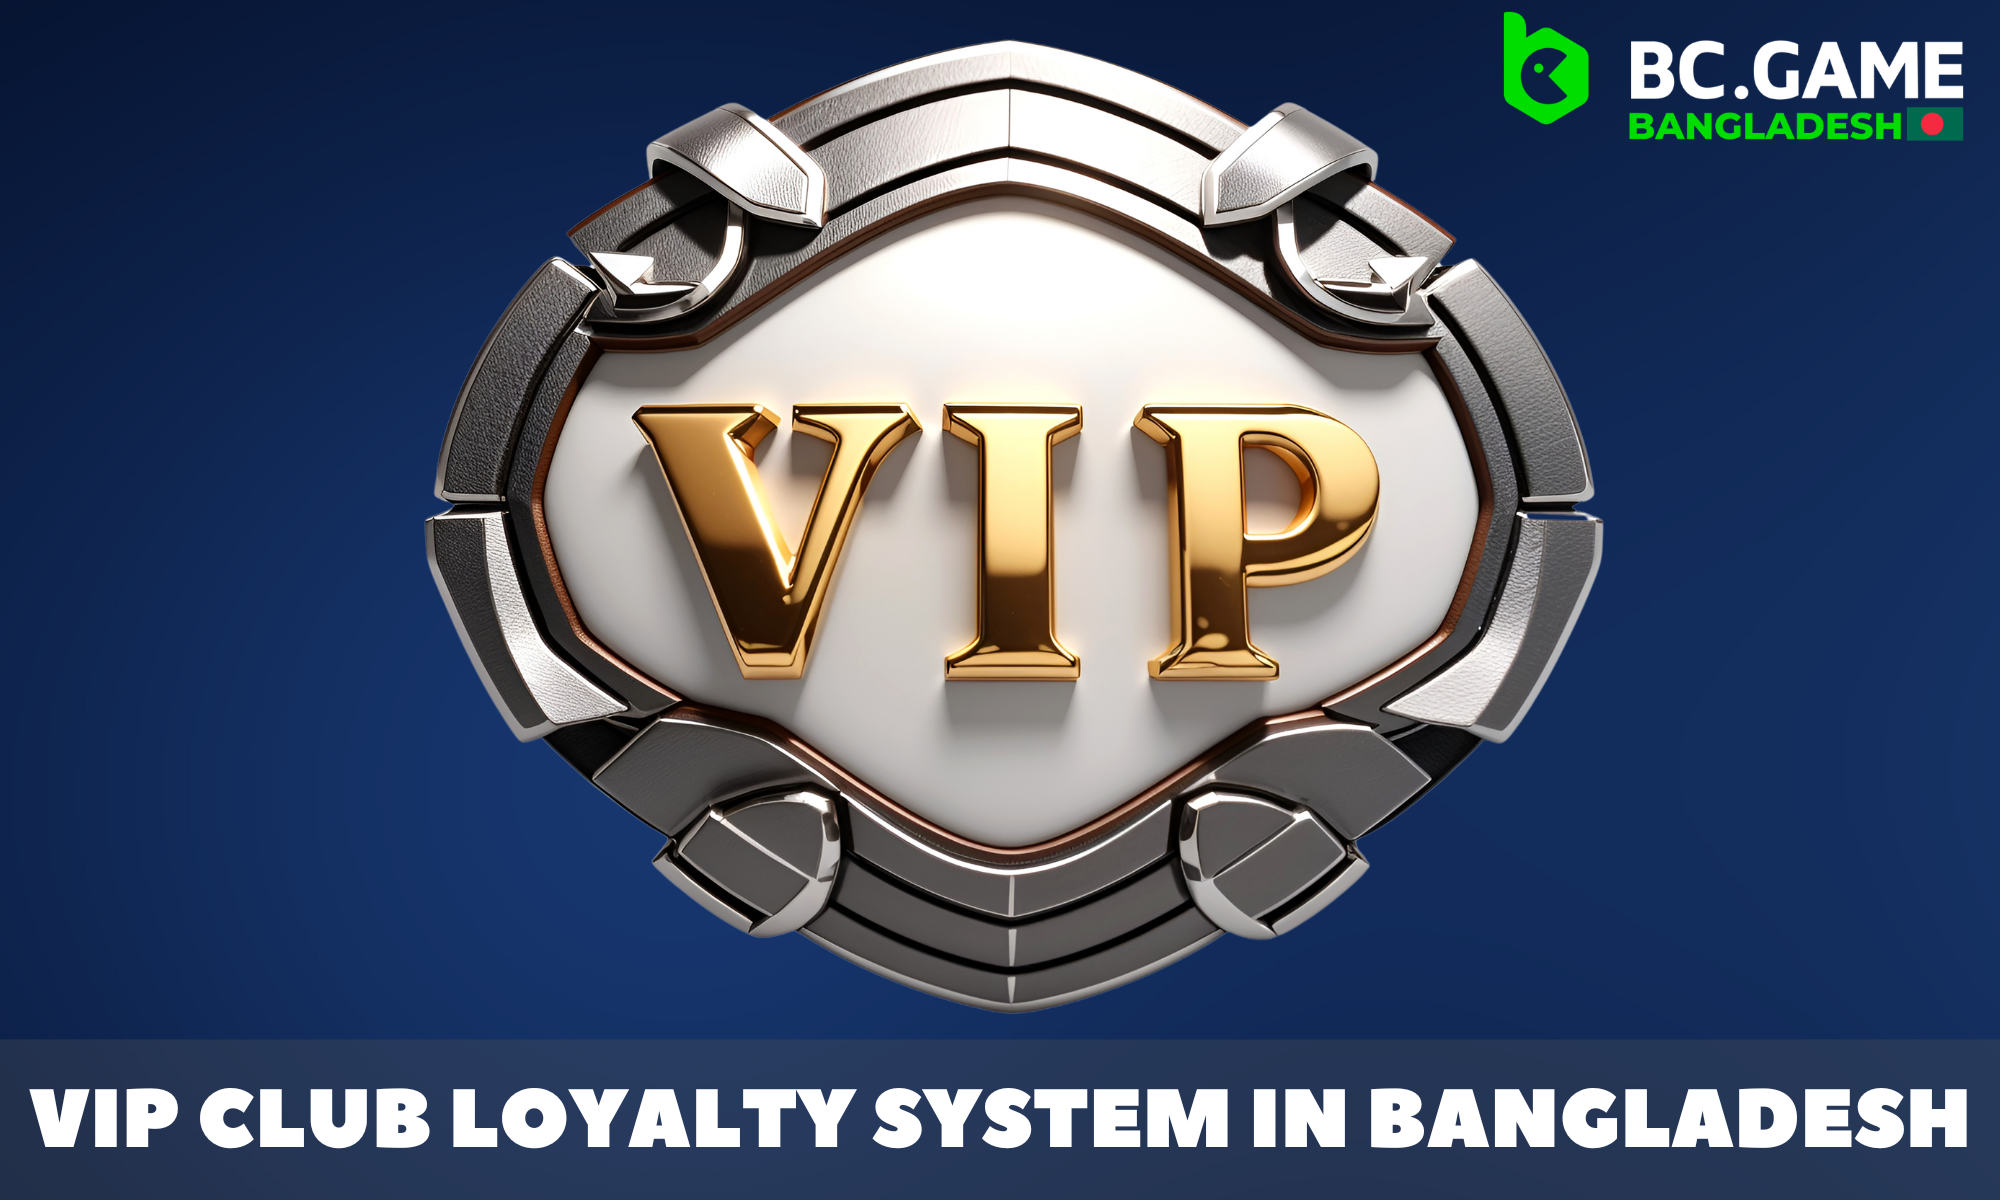 BC-Game has its own VIP club that is available to users from Bangladesh